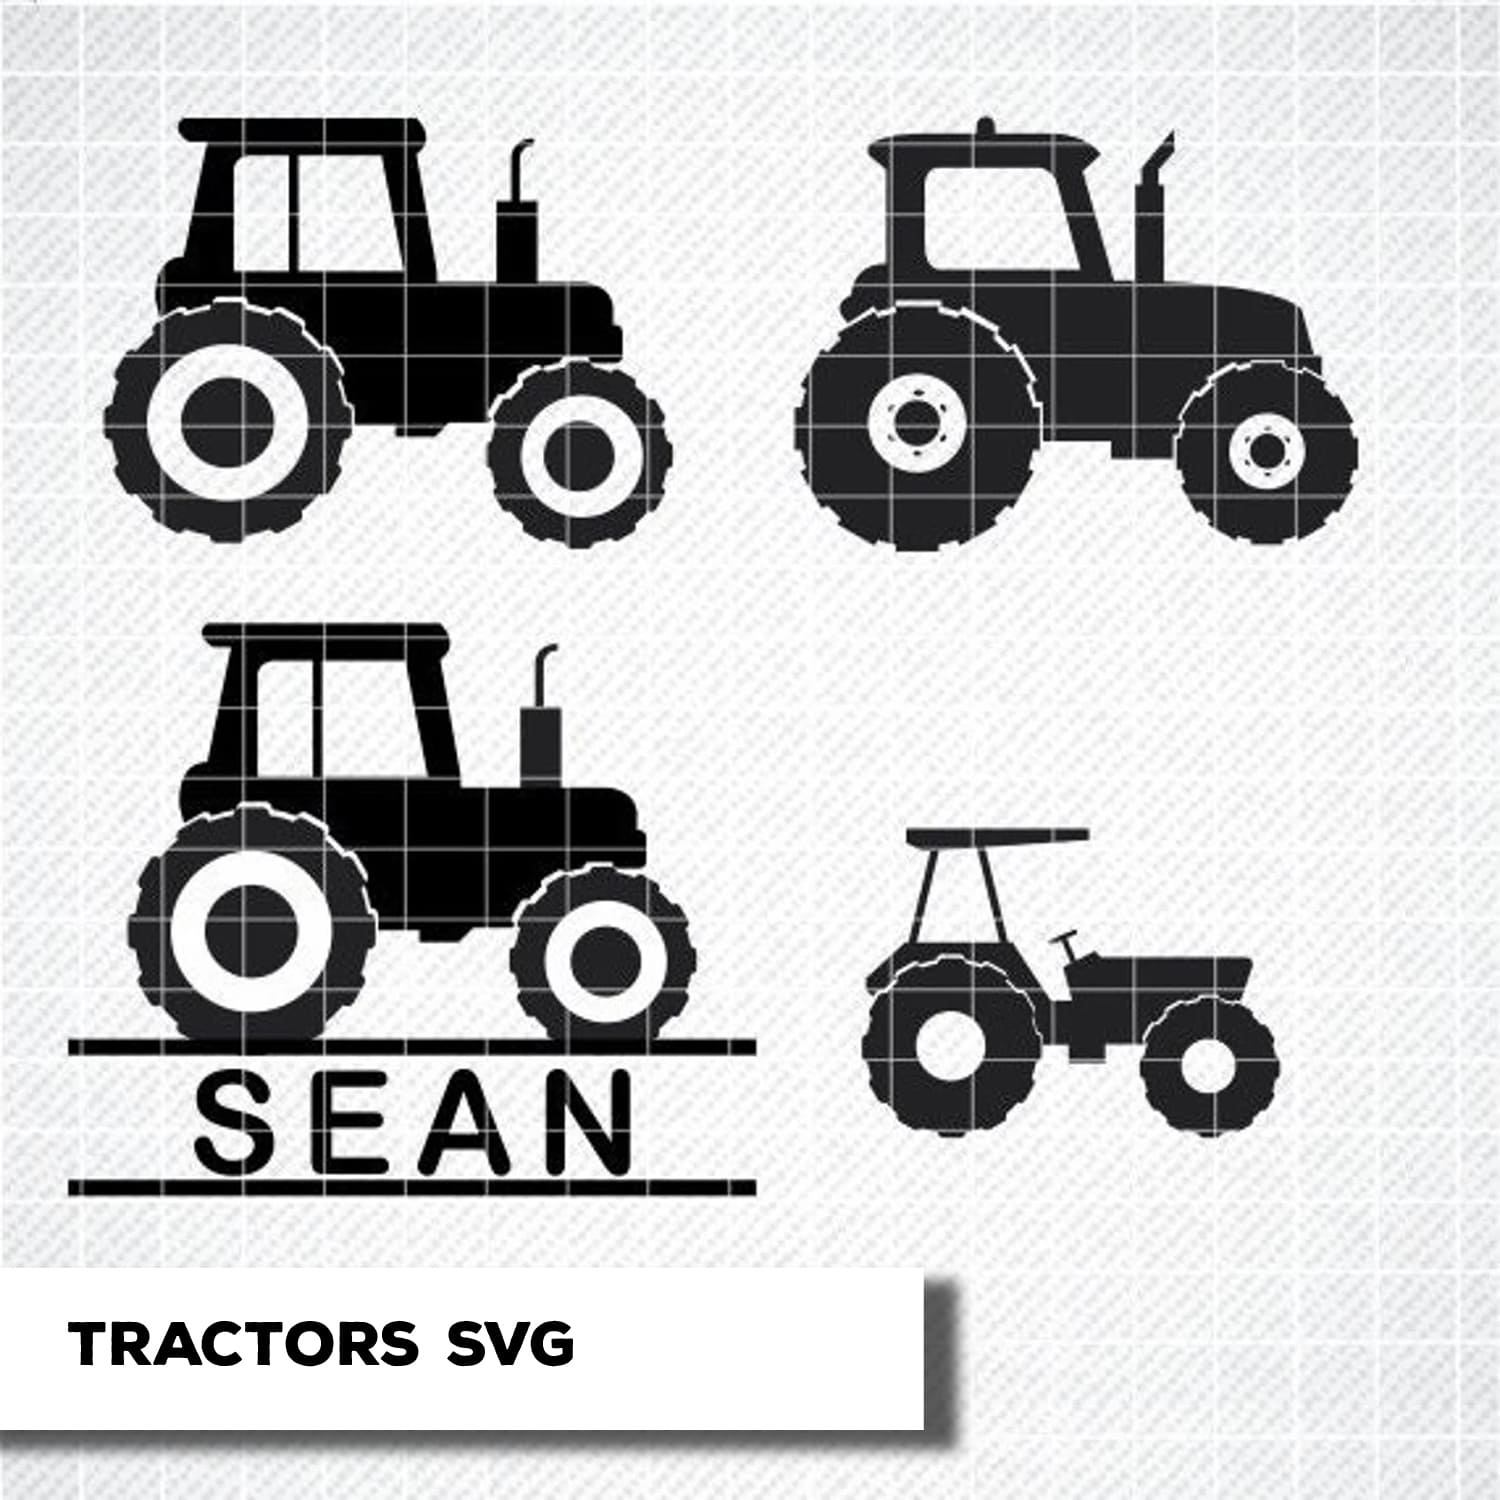 Tractors SVG, DXF, PNG cover image.